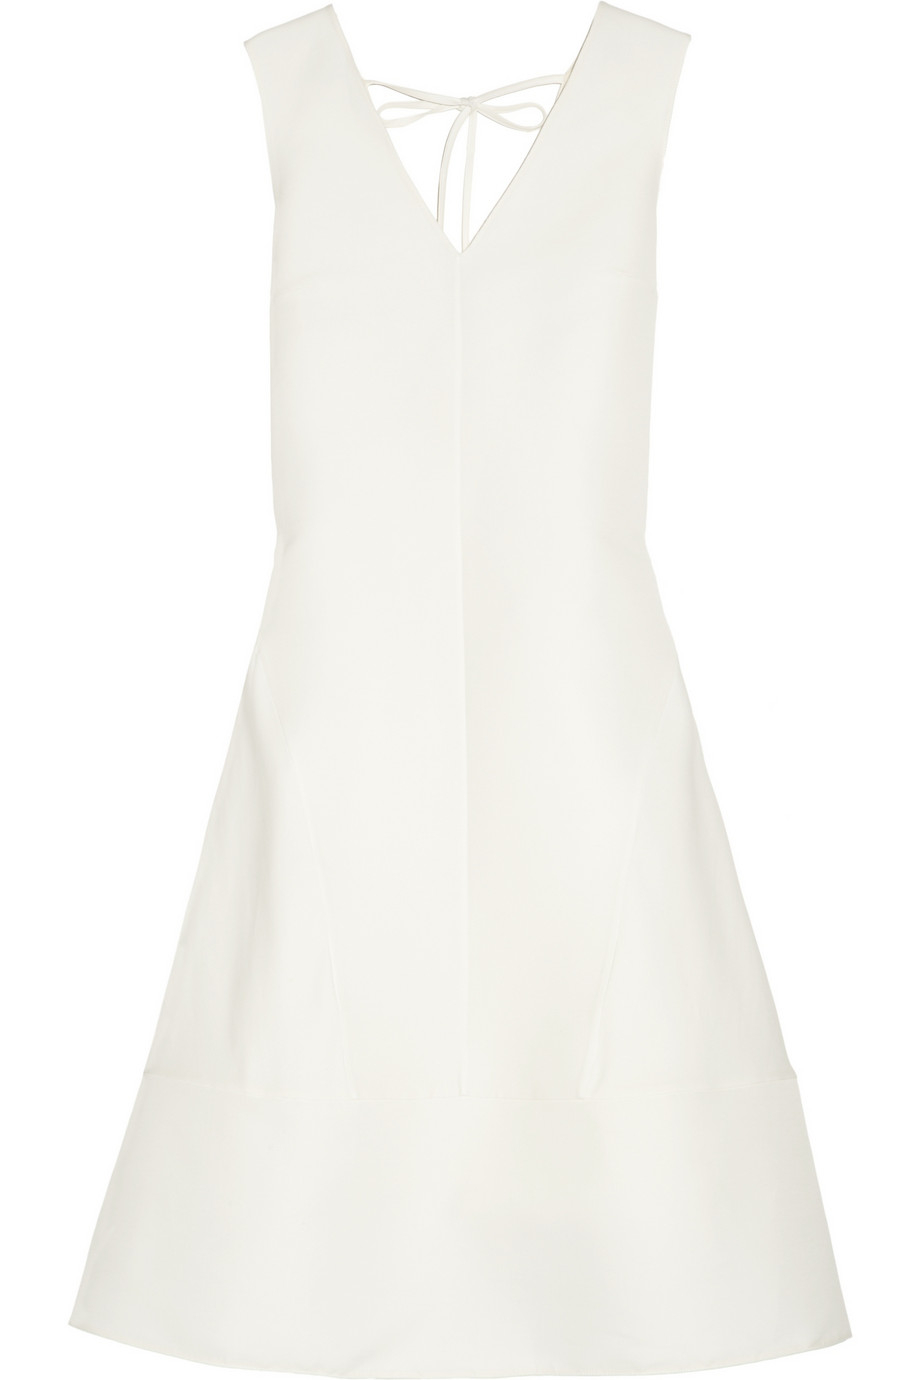 Lyst - Marni Cotton and Silkblend Organdy Dress in White